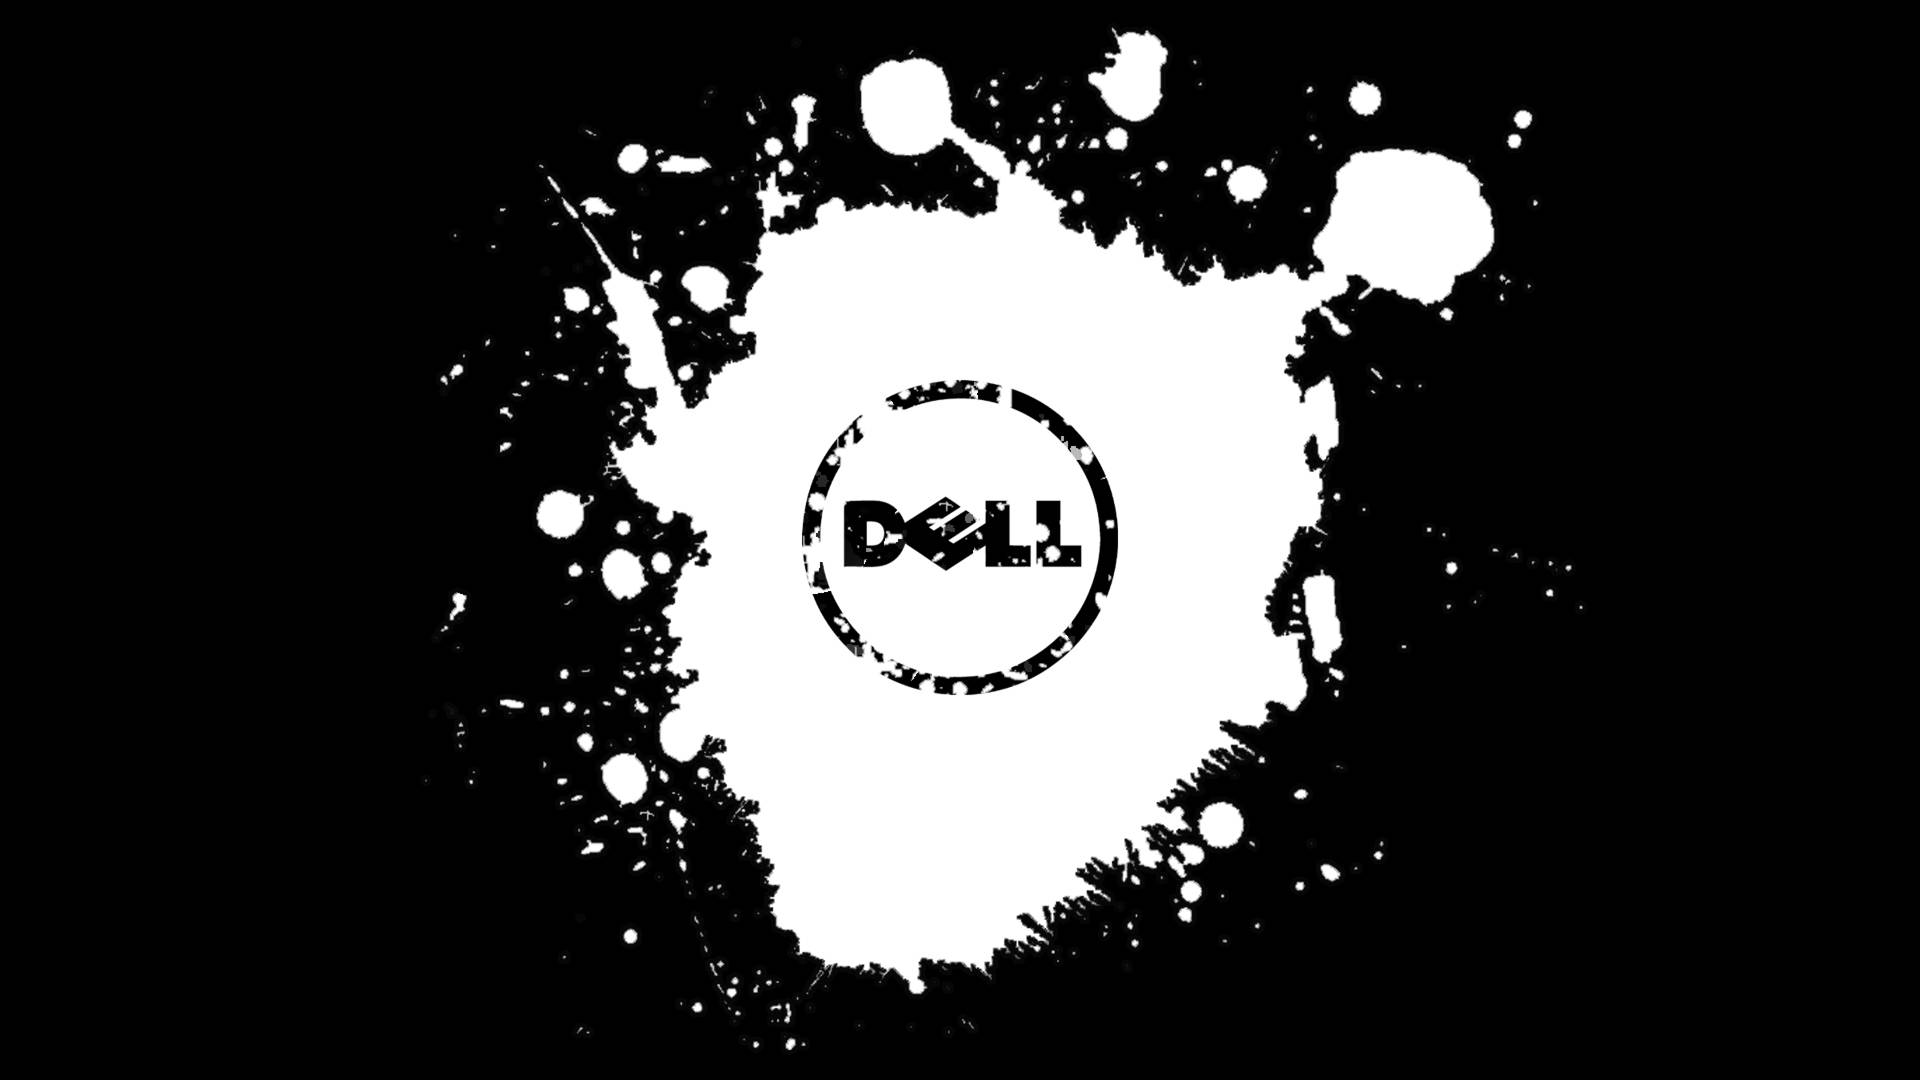 100+] Dell 4k Wallpapers | Wallpapers.com